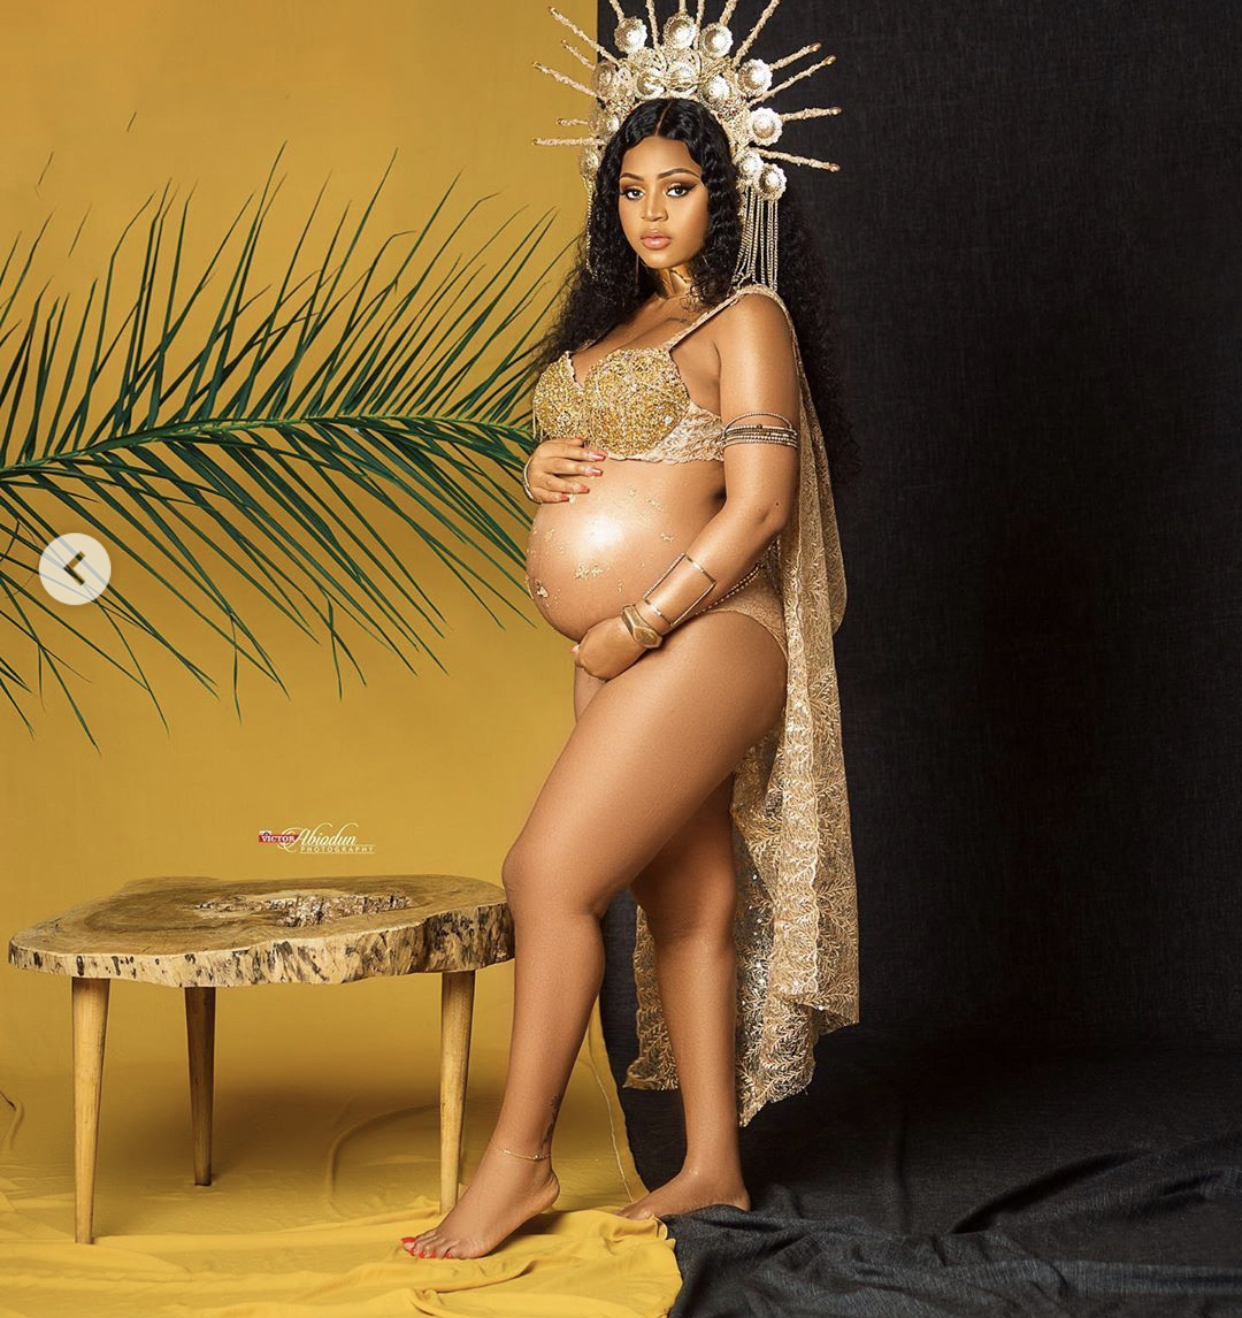 Photo from her maternity shoot